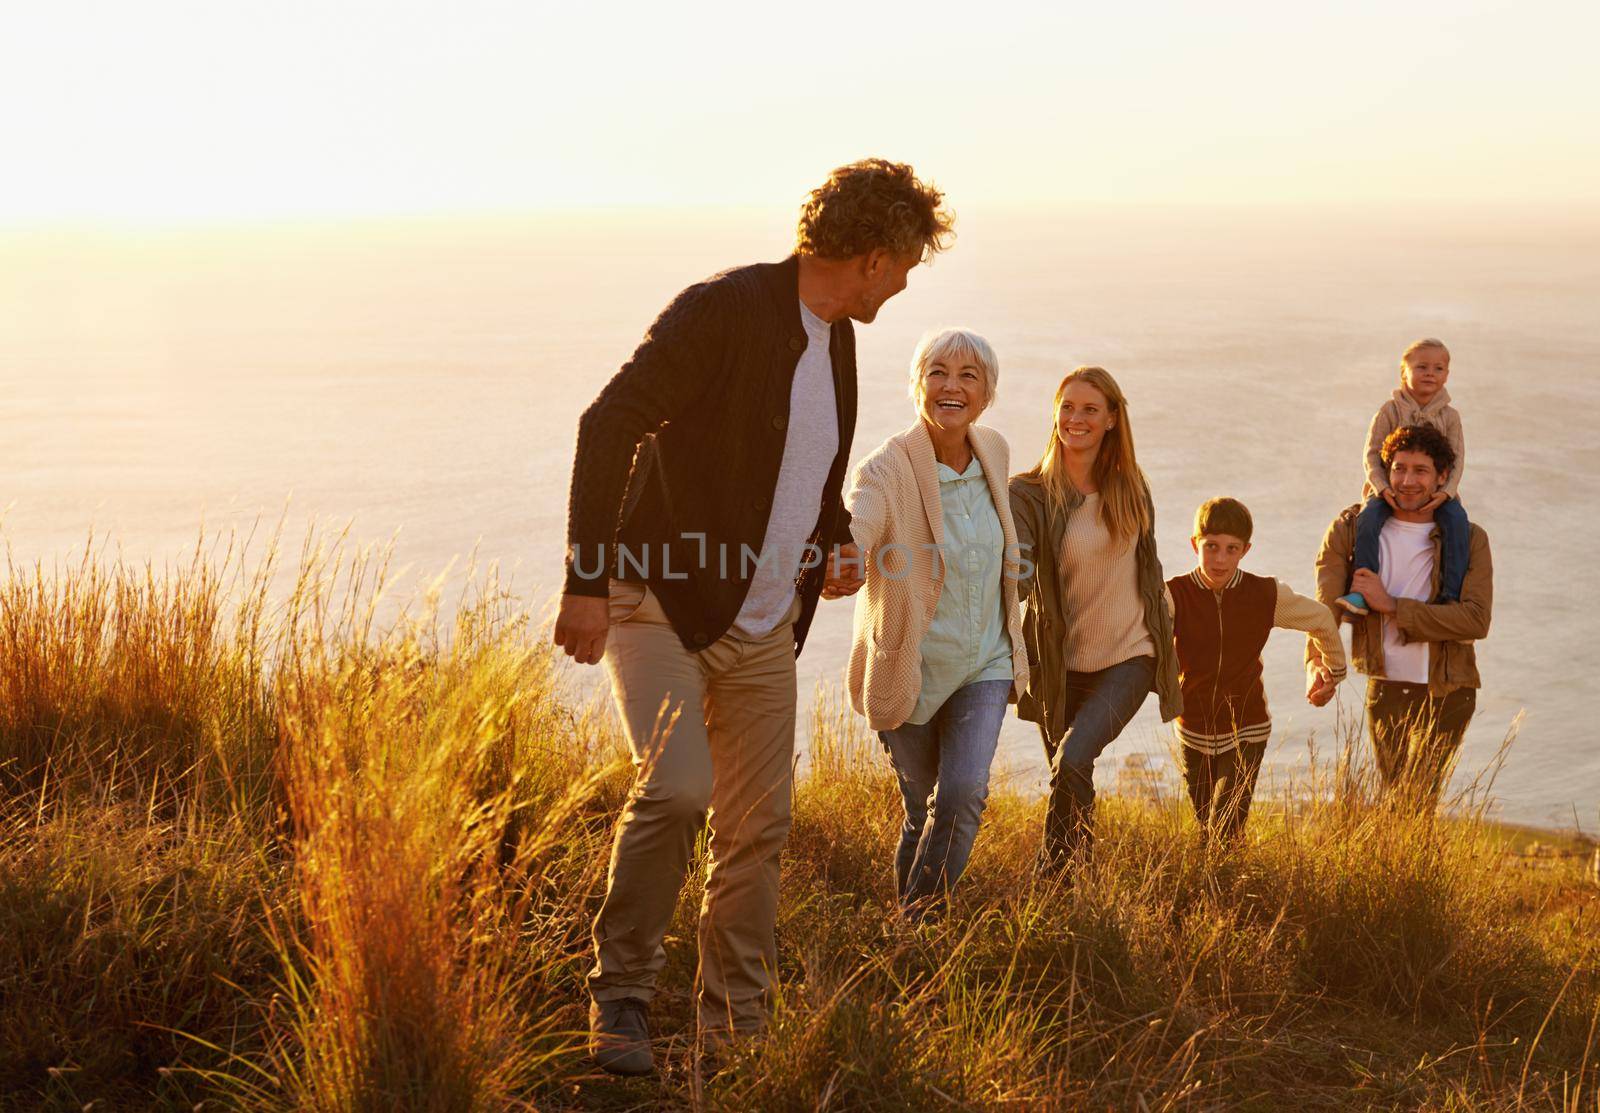 A multi-generational family walking up a grassy hill together at sunset with the ocean in the background.